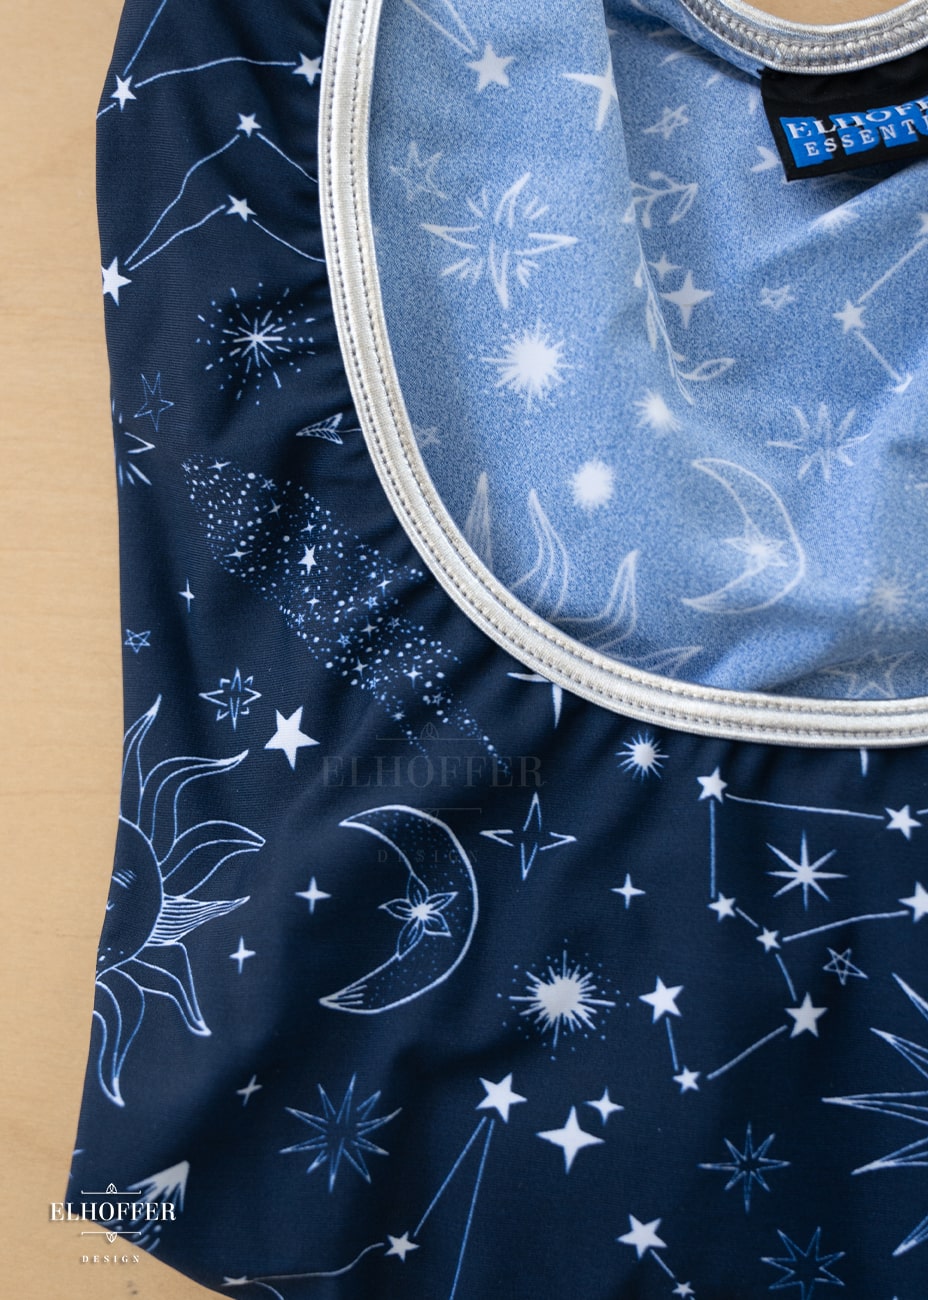 A close up on the silver collar detail and the star crossed lover fabric. The Star-Crossed Lovers print is a celestial inspired pattern featuring a navy base and white stars, constellations, sunds, moons, and other small details scattered across the repeated art.